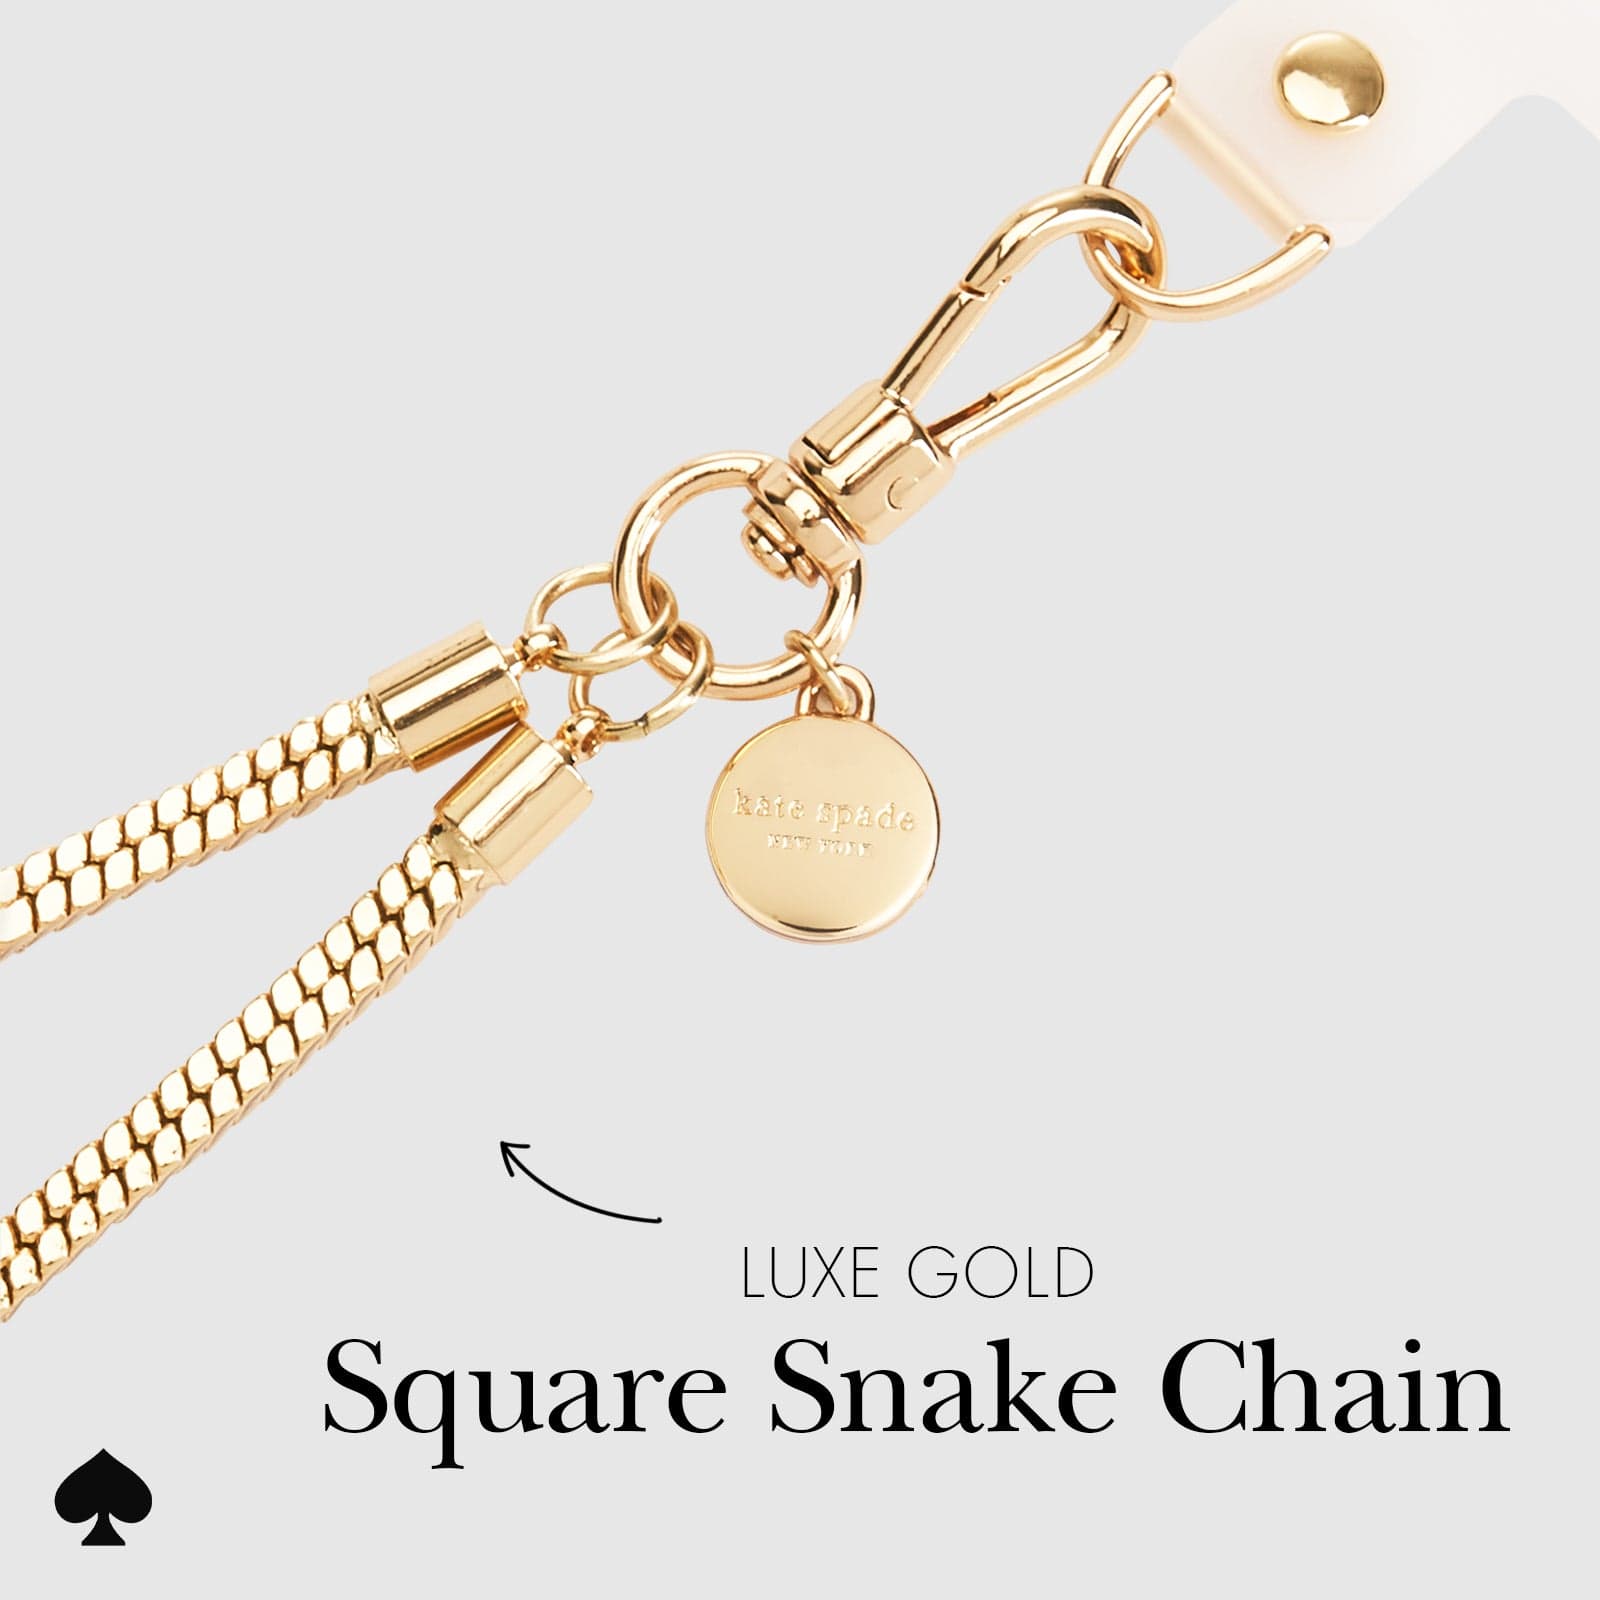 LUXE GOLD SQUARE SNAKE CHAIN